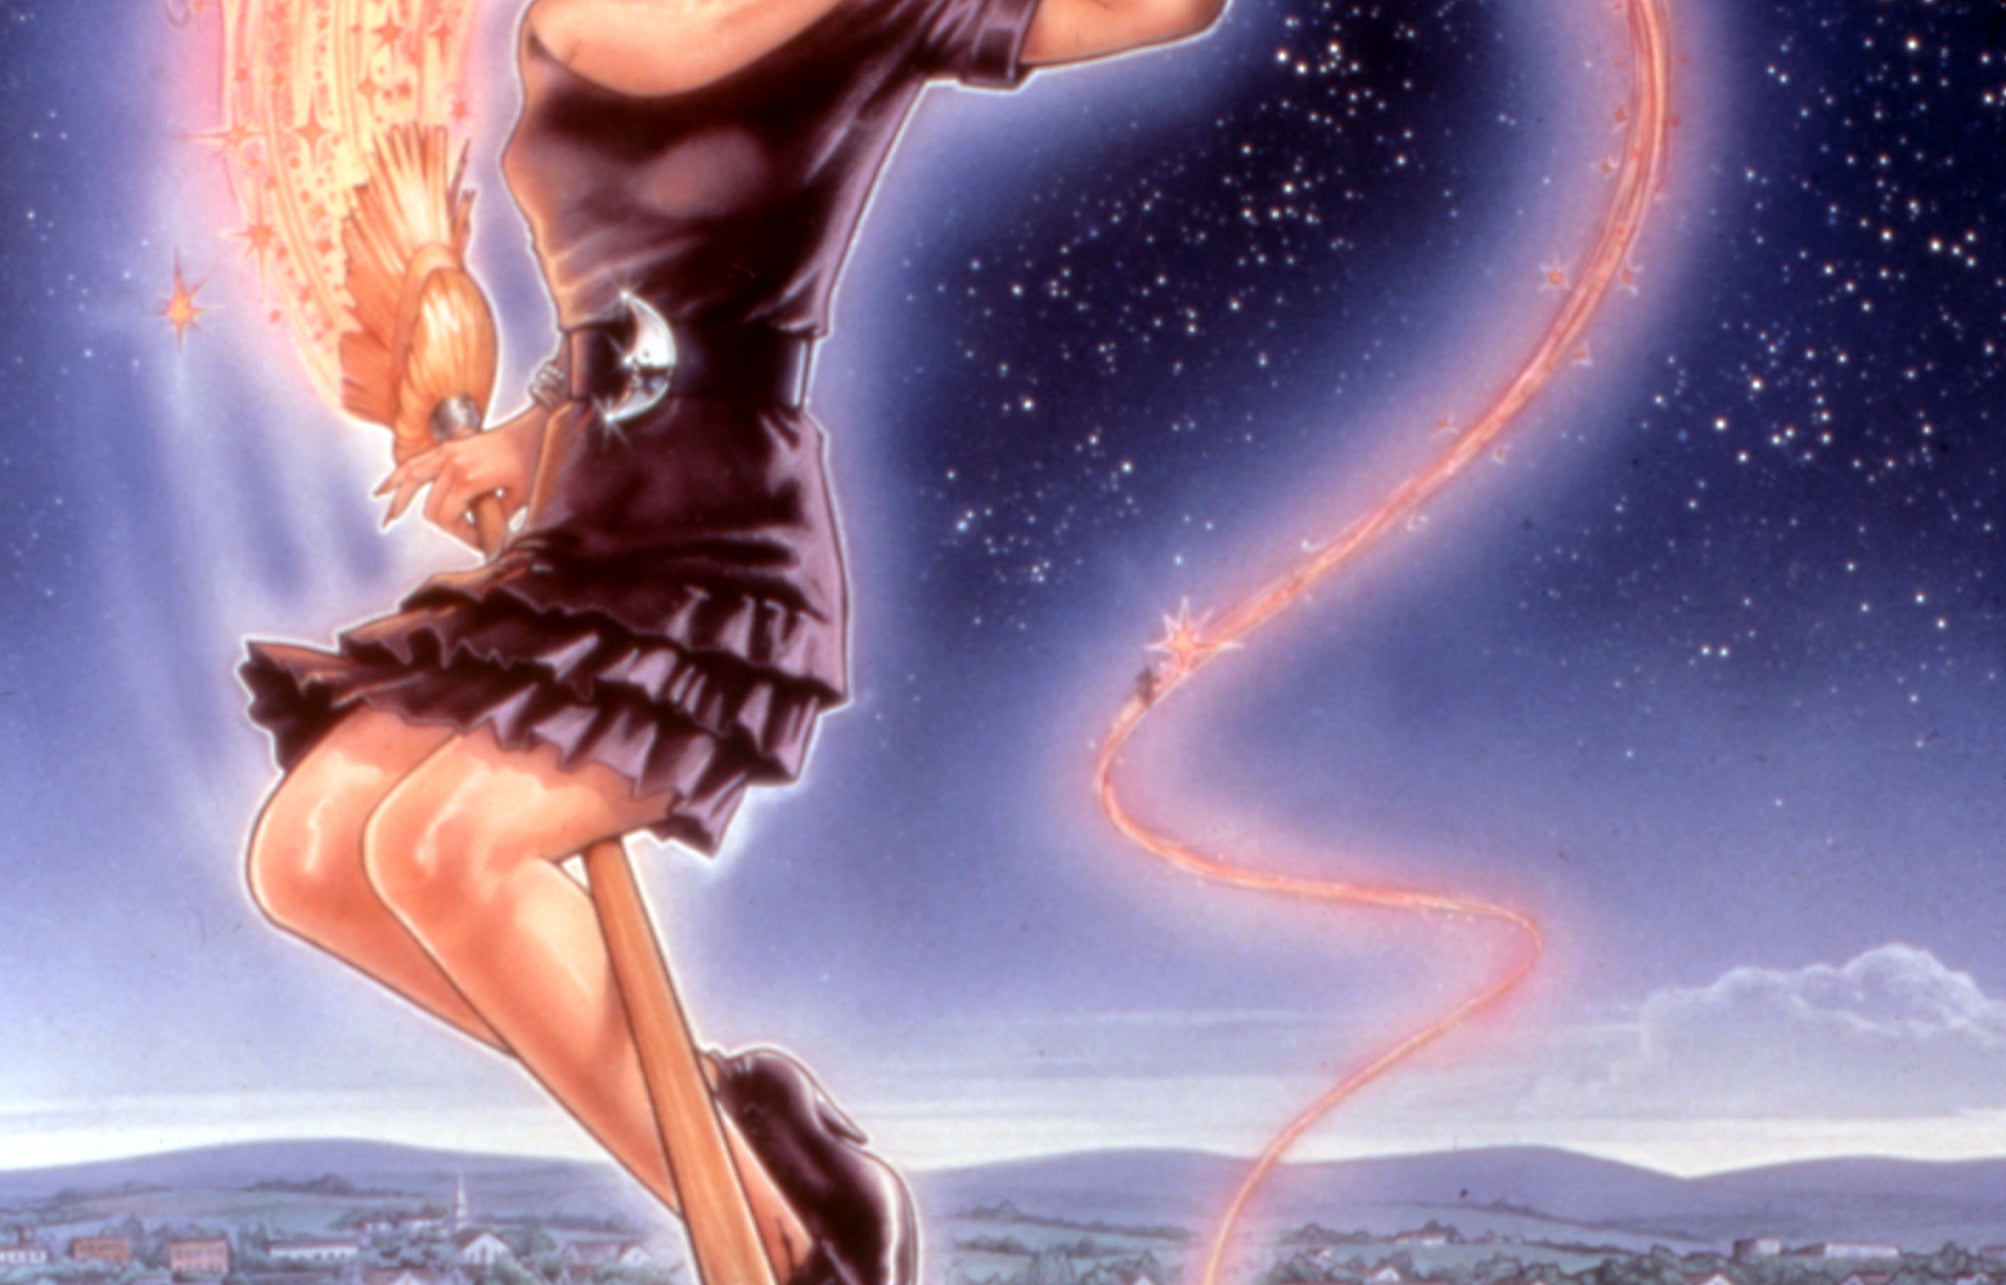 Animated character Sabrina the Teenage Witch flying on a broomstick over a town with a starry sky backdrop